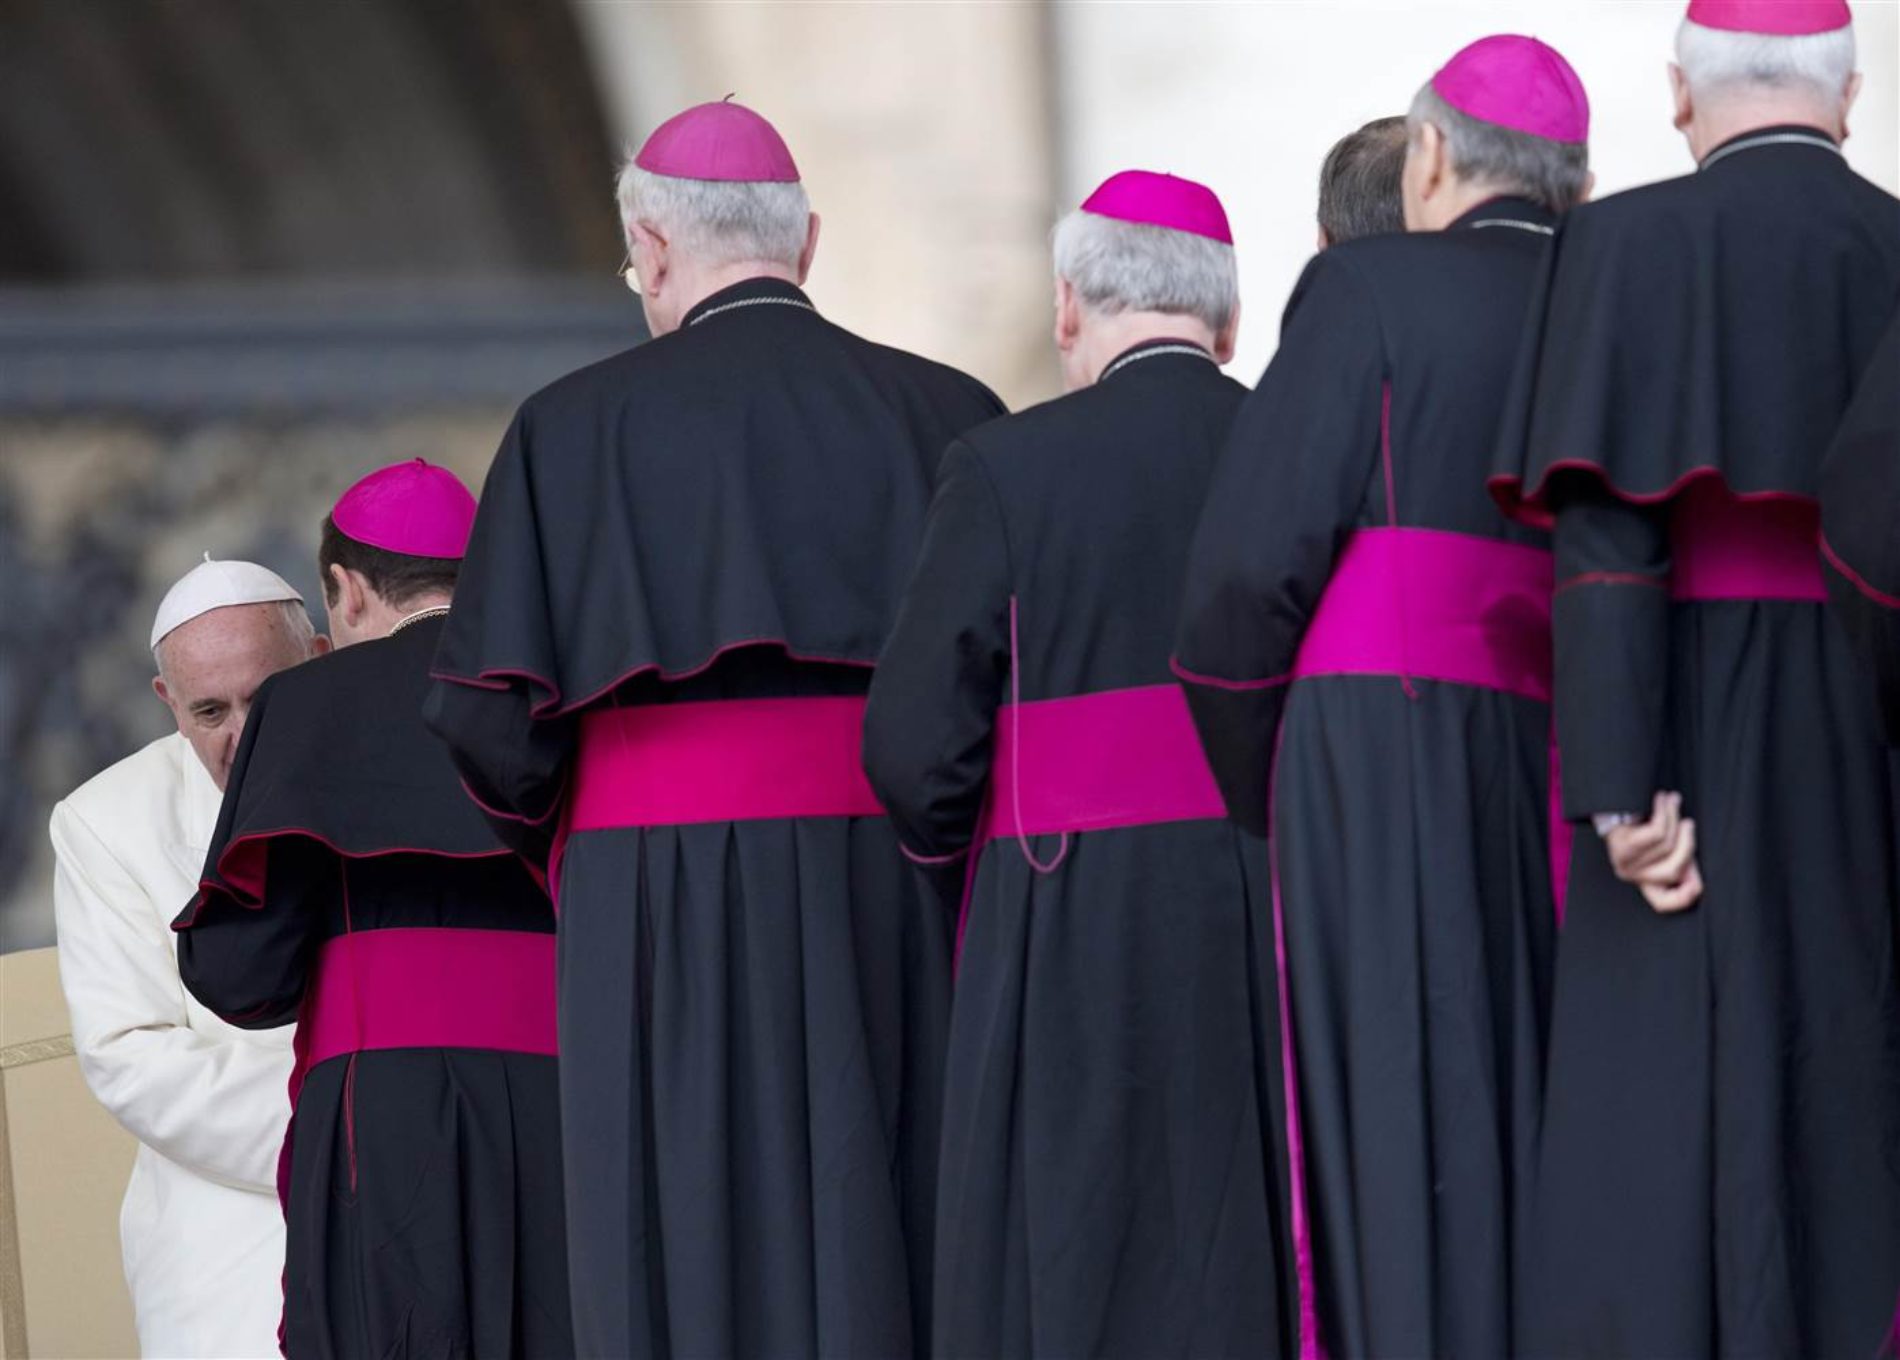 The Vatican Still Maintains That Gay Men Shouldn’t Be Priests